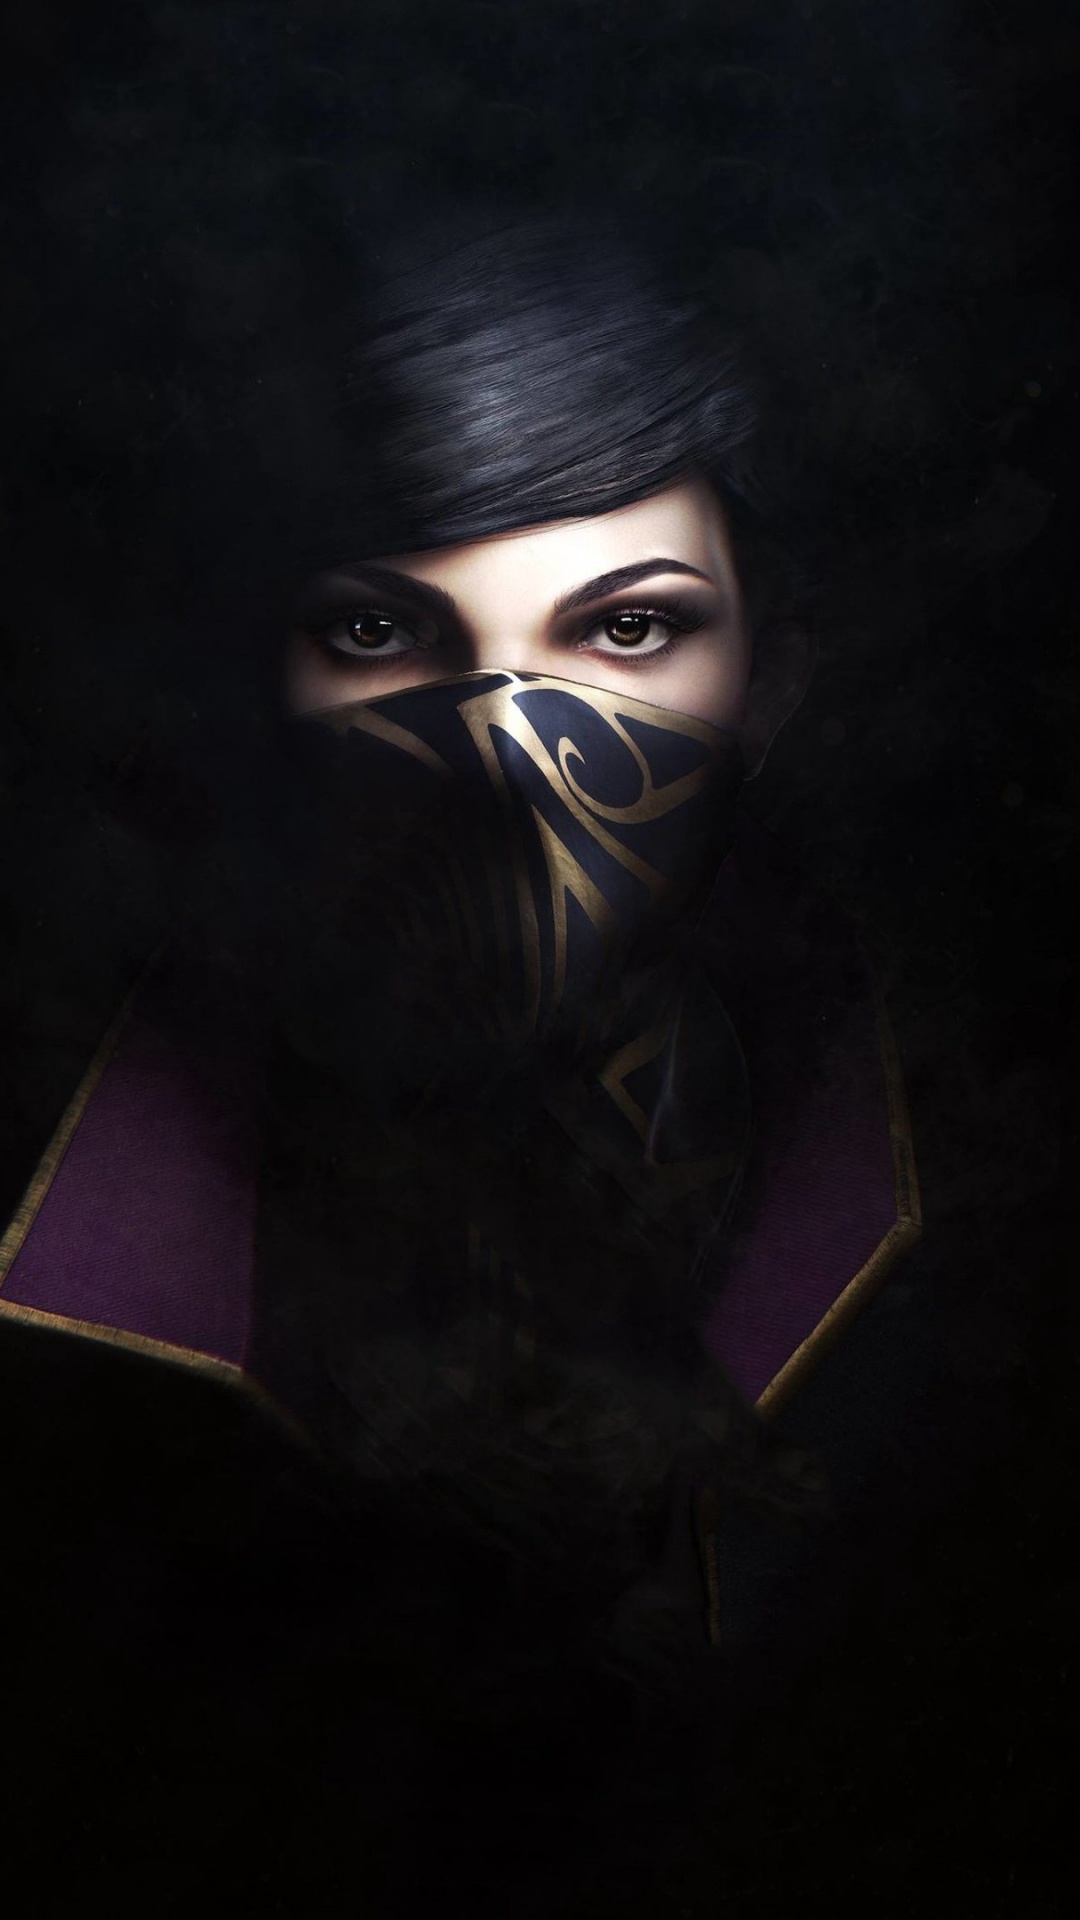 Dishonored 2, Déshonoré, Bethesda Softworks, Jeu D'infiltration, Obscurité. Wallpaper in 1080x1920 Resolution